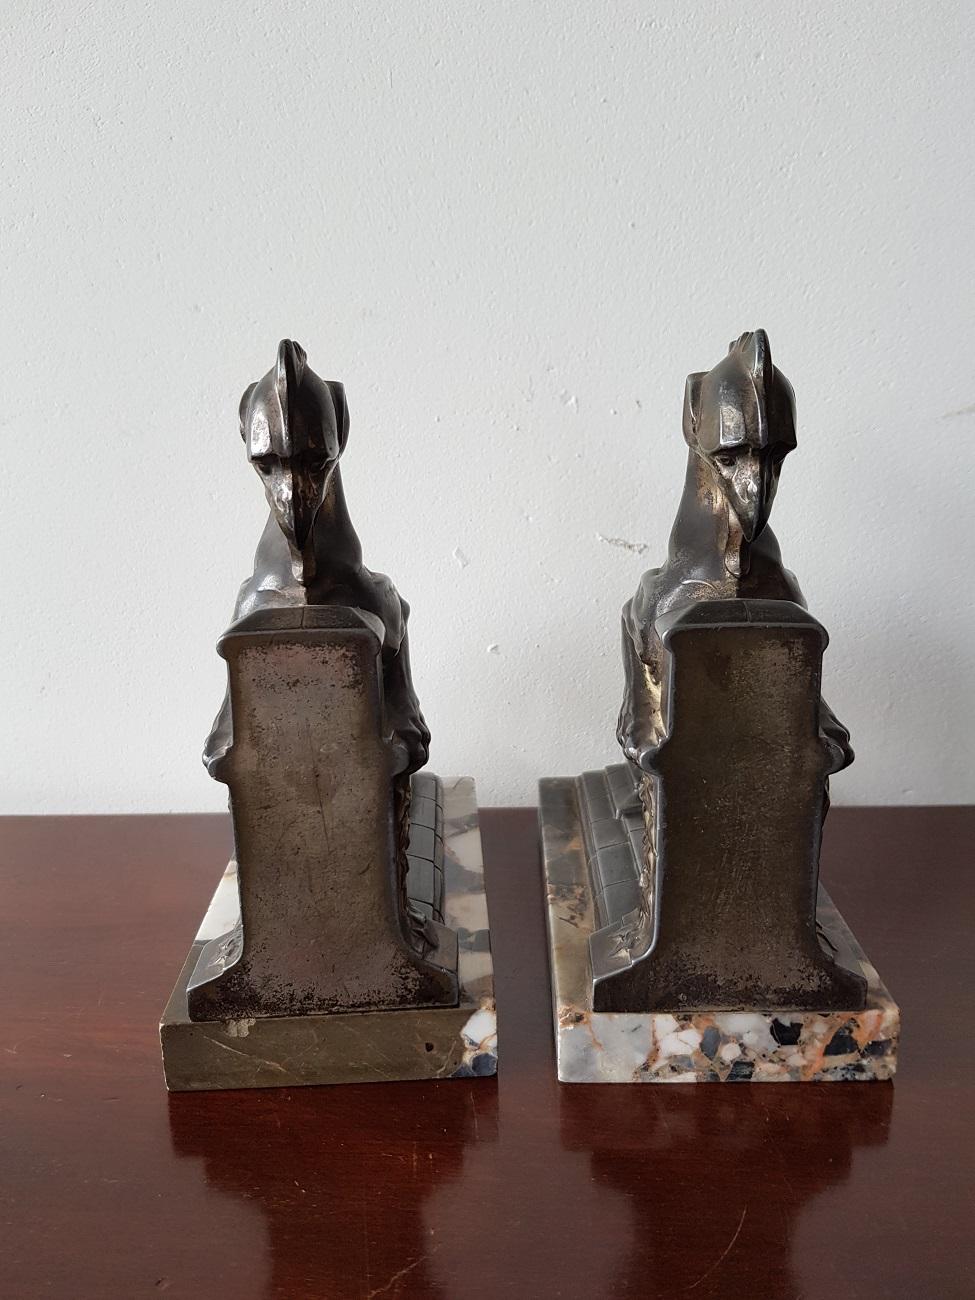 20th Century Pair of French Art Deco Bookends with Mythical Animals